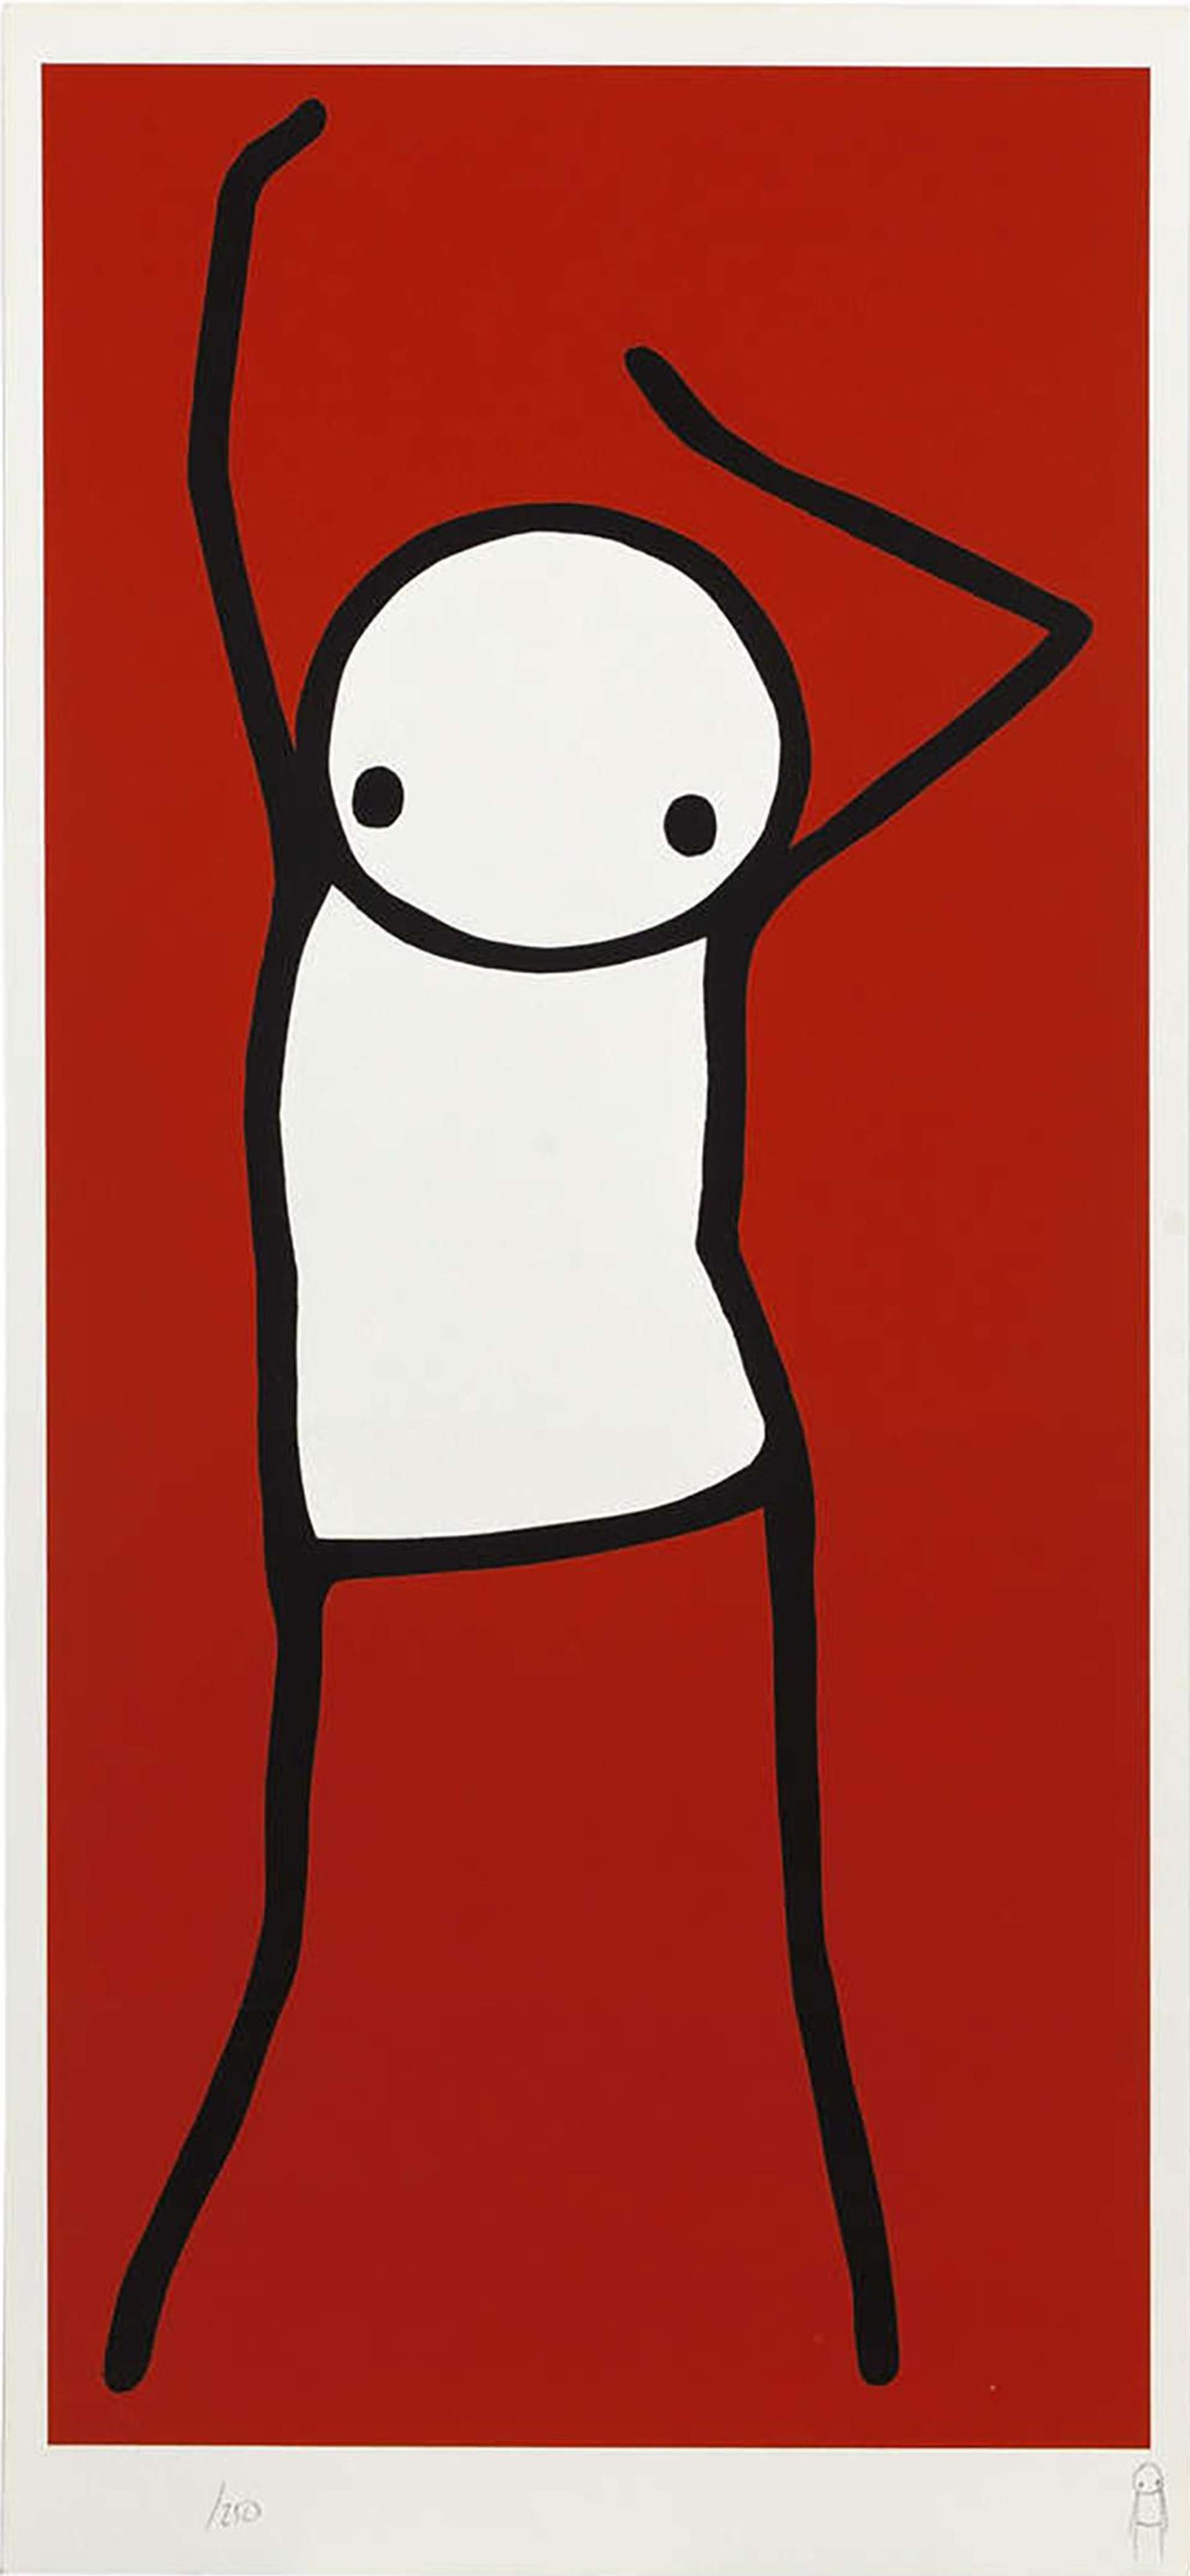 STIK’s Dancer (red). A digital print of a stick figure with its arms raised and bent in the air, dancing against a red background.